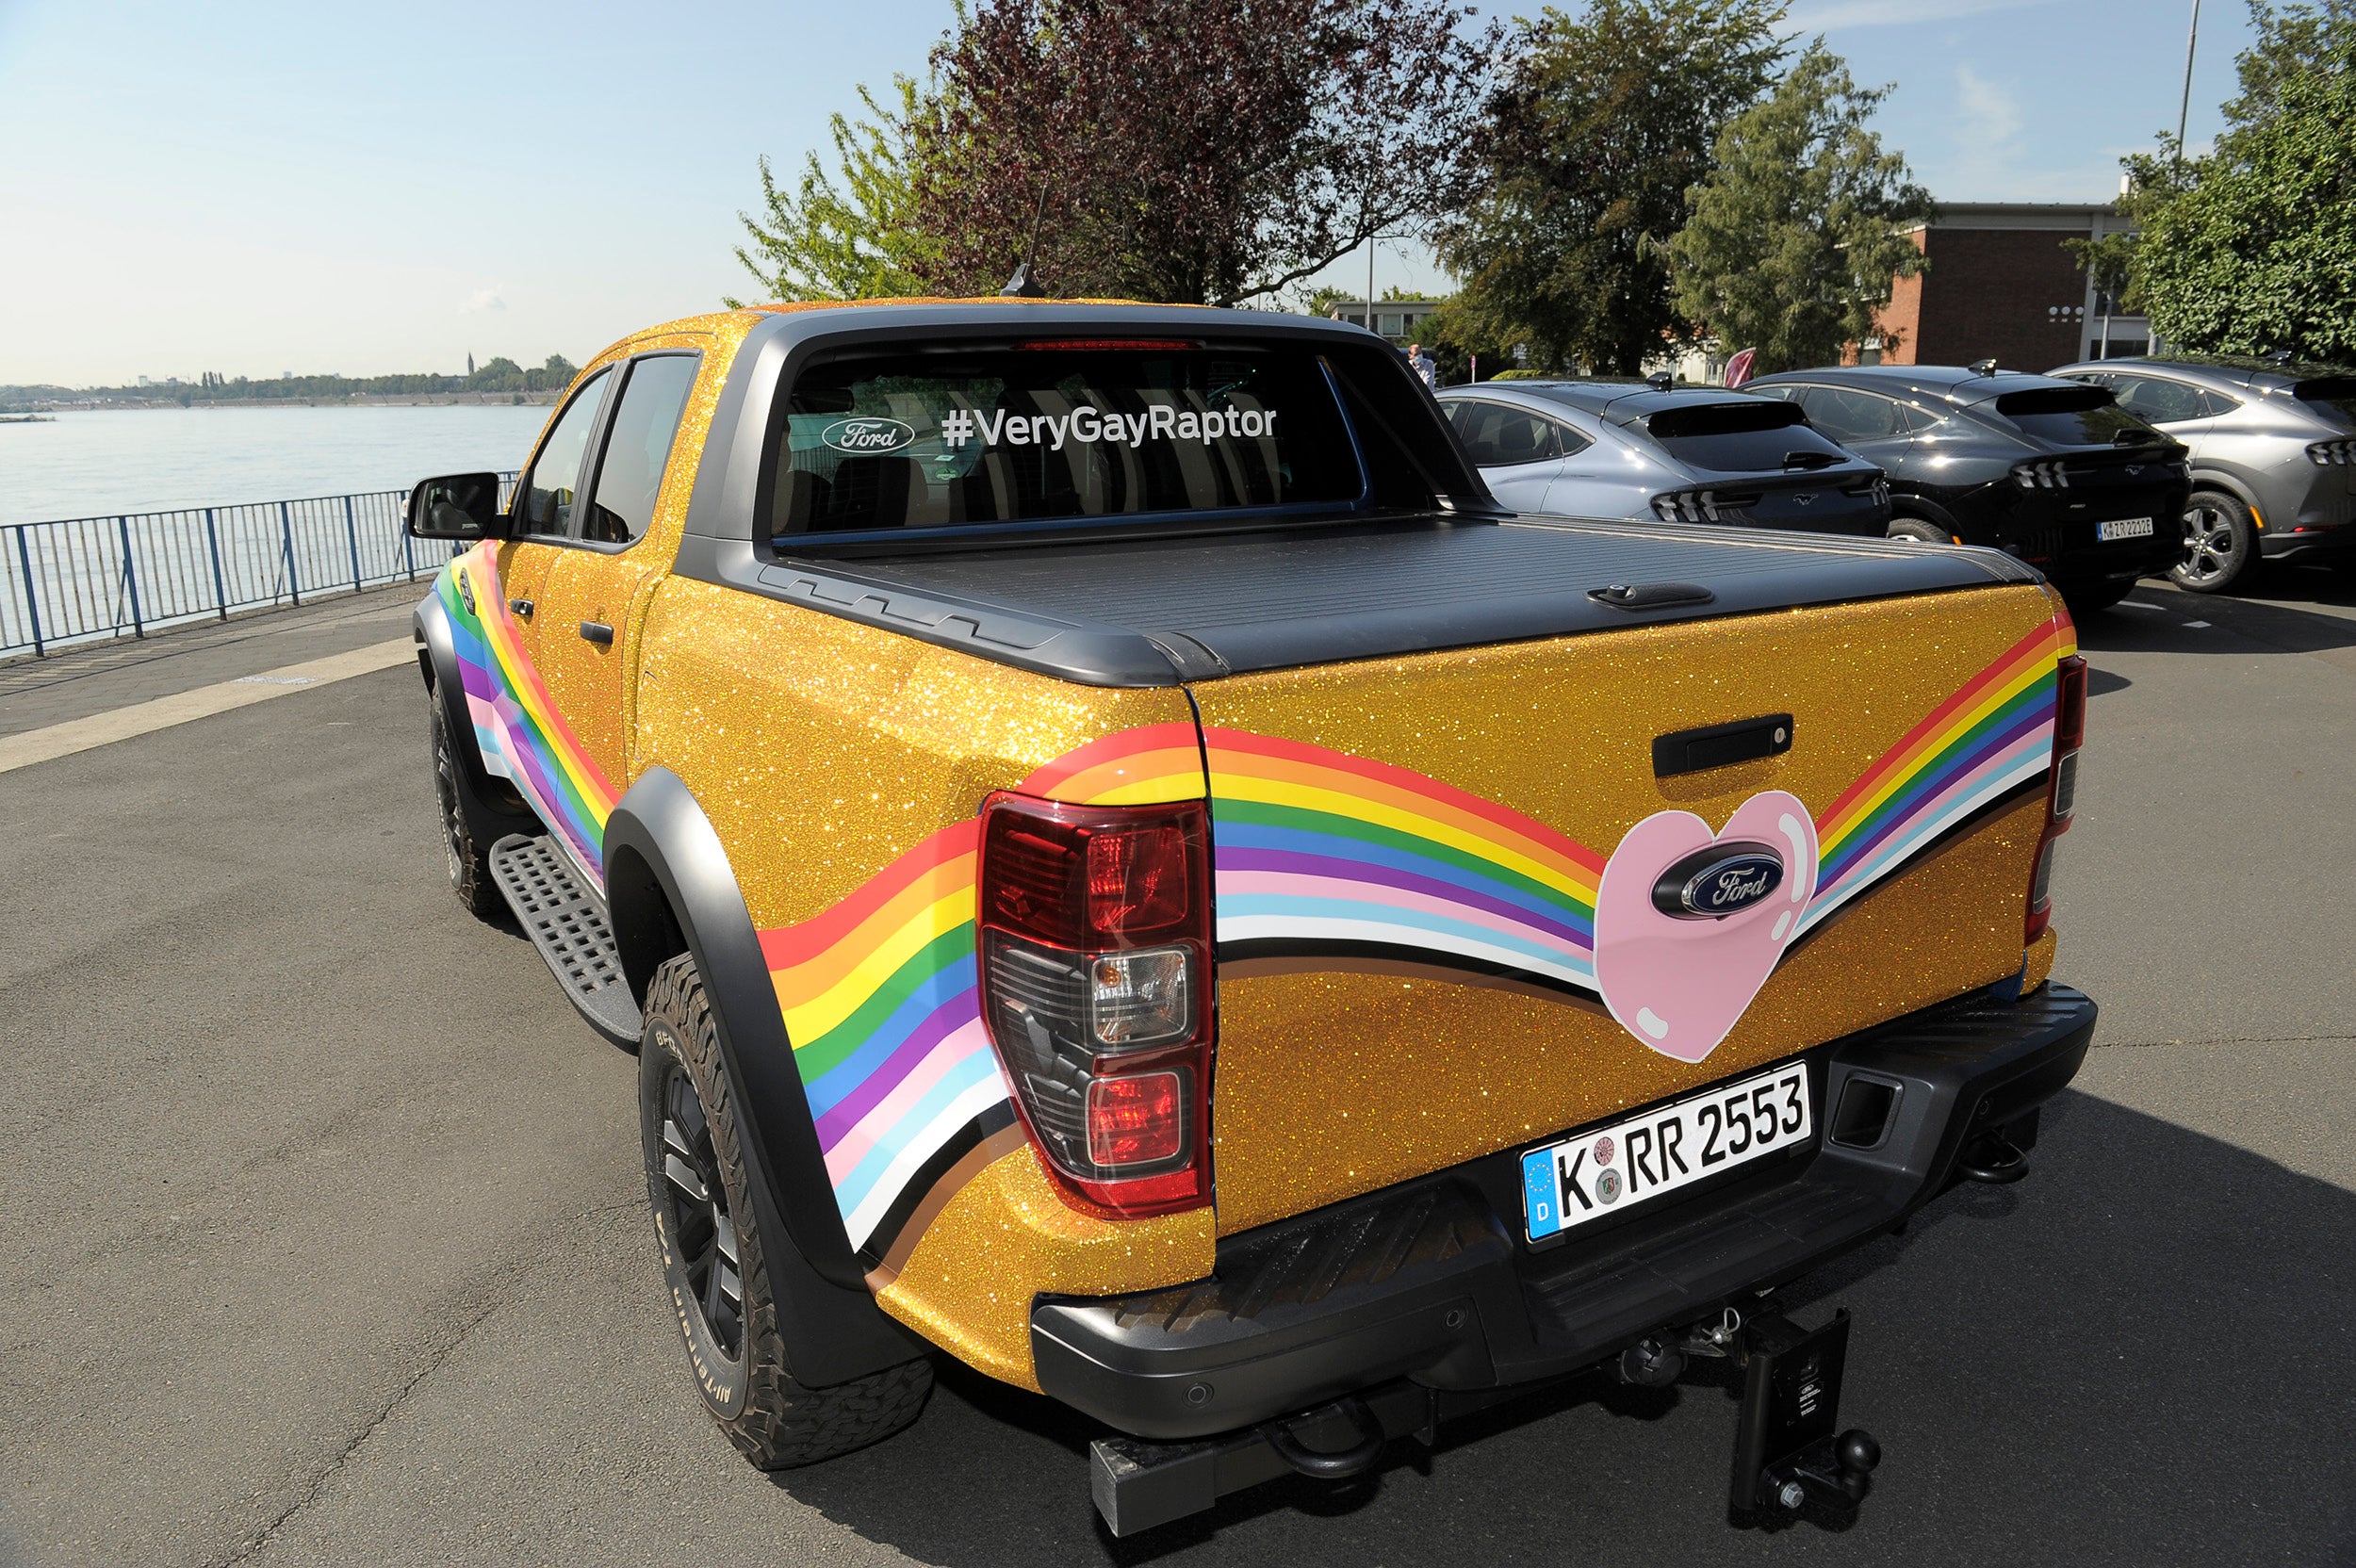 Ford Created A Rainbow ‘Very Gay’ Ranger Raptor In Response To An Online Troll